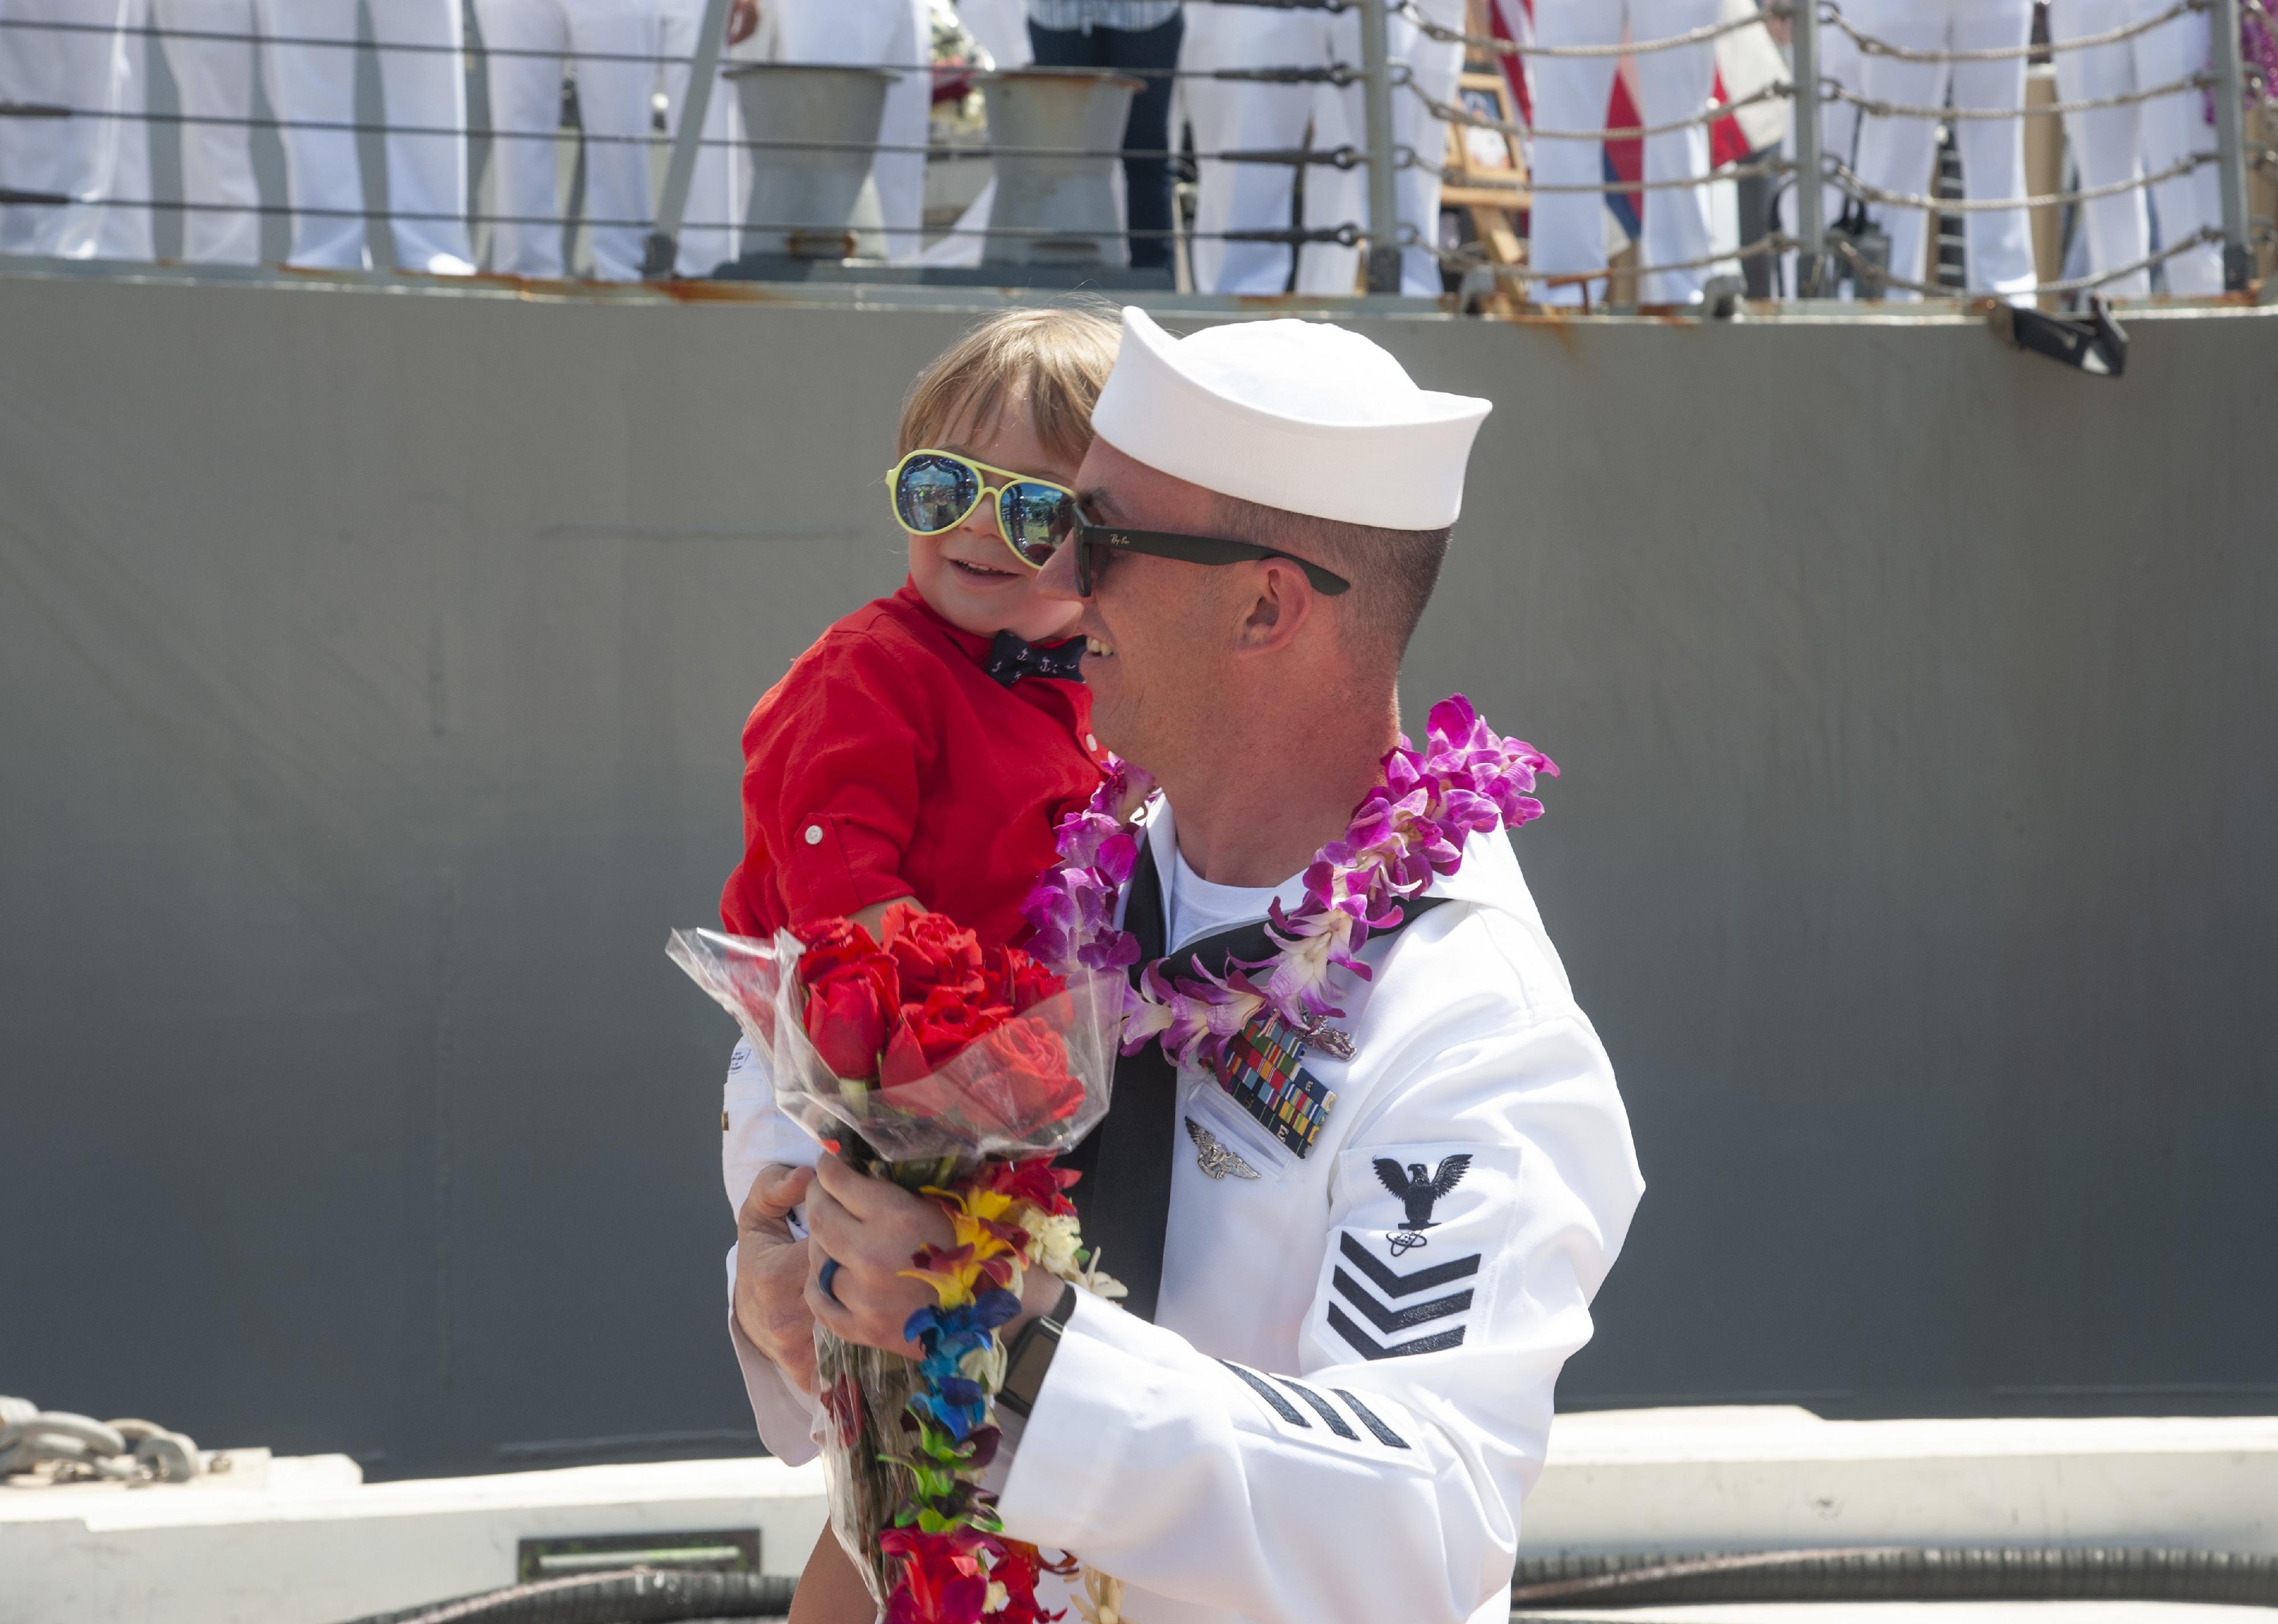 A sailor with flowers holds a little girl in sunglasses next to a ship.